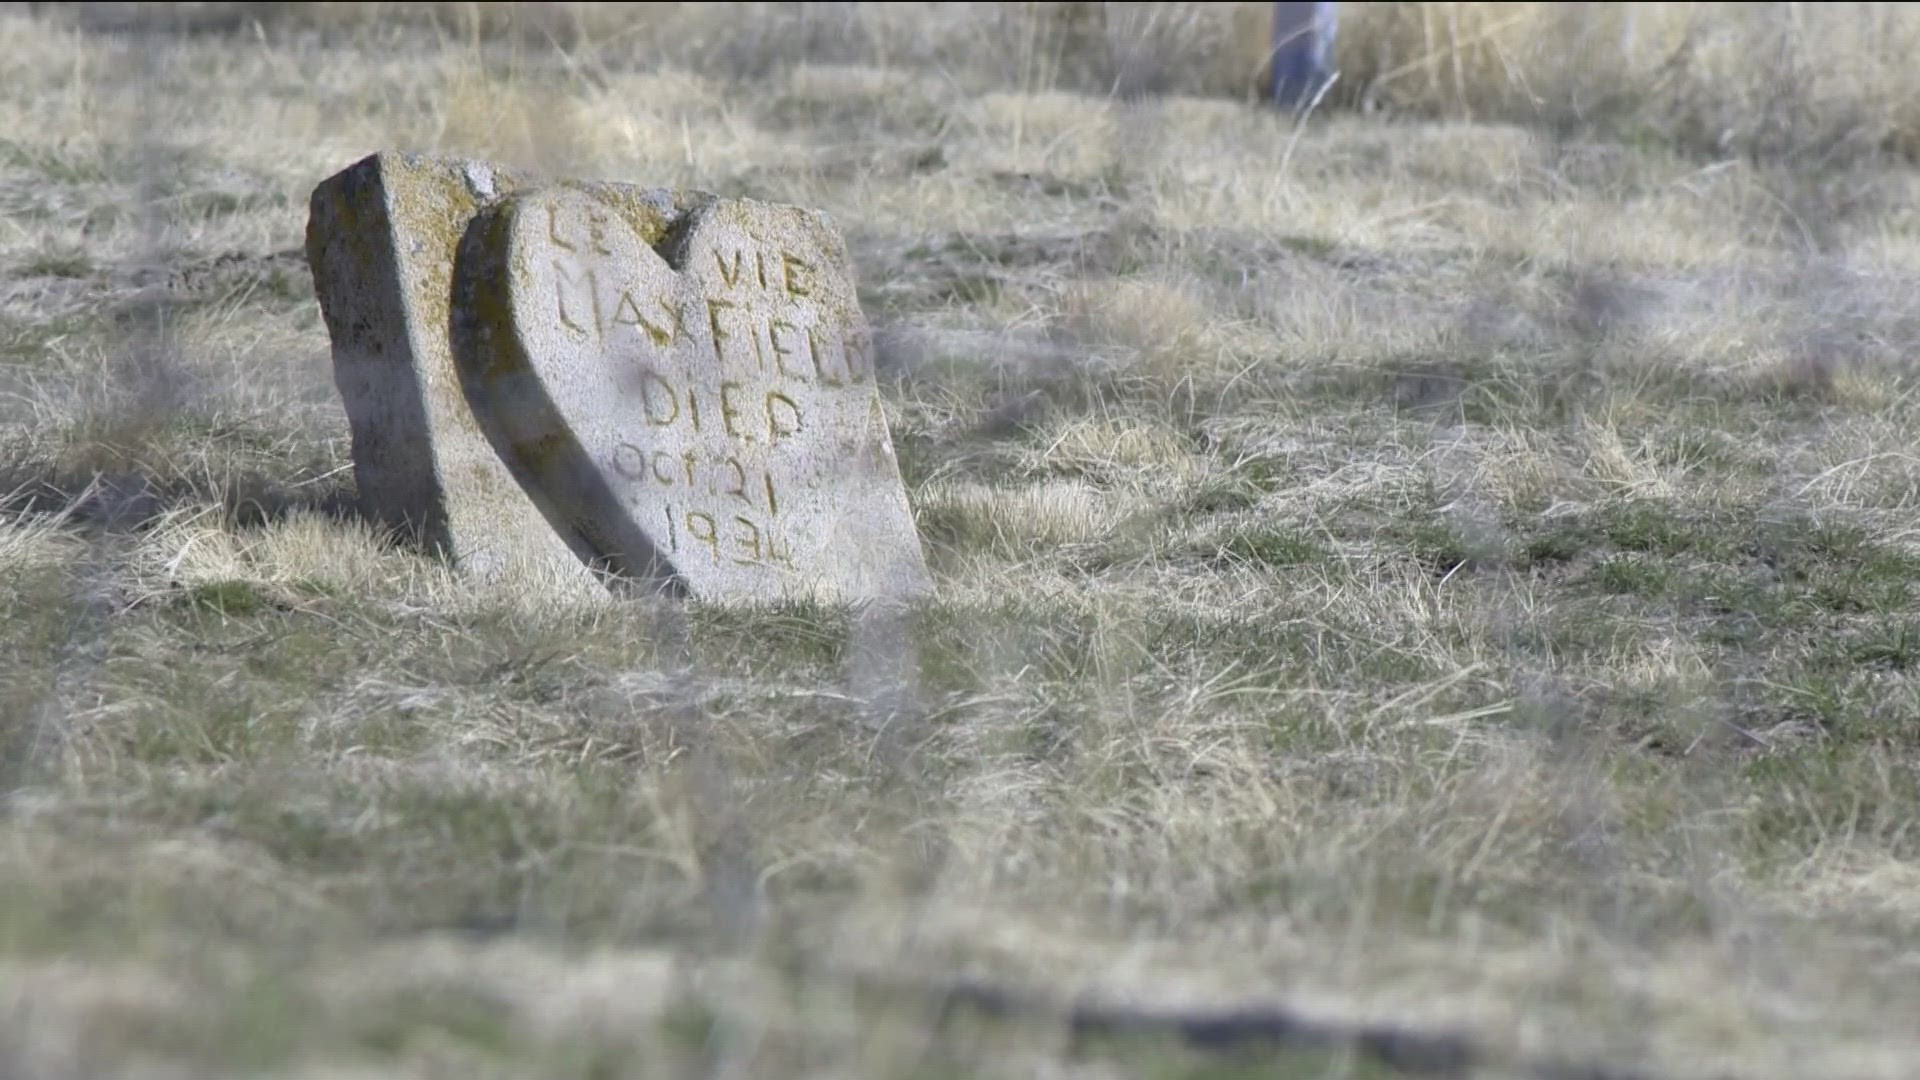 Idaho State Penitentiary leaders said the cemetery is "rarely seen" and captures the facilities 101 years of operation. Tours run from March 18 to March 26.